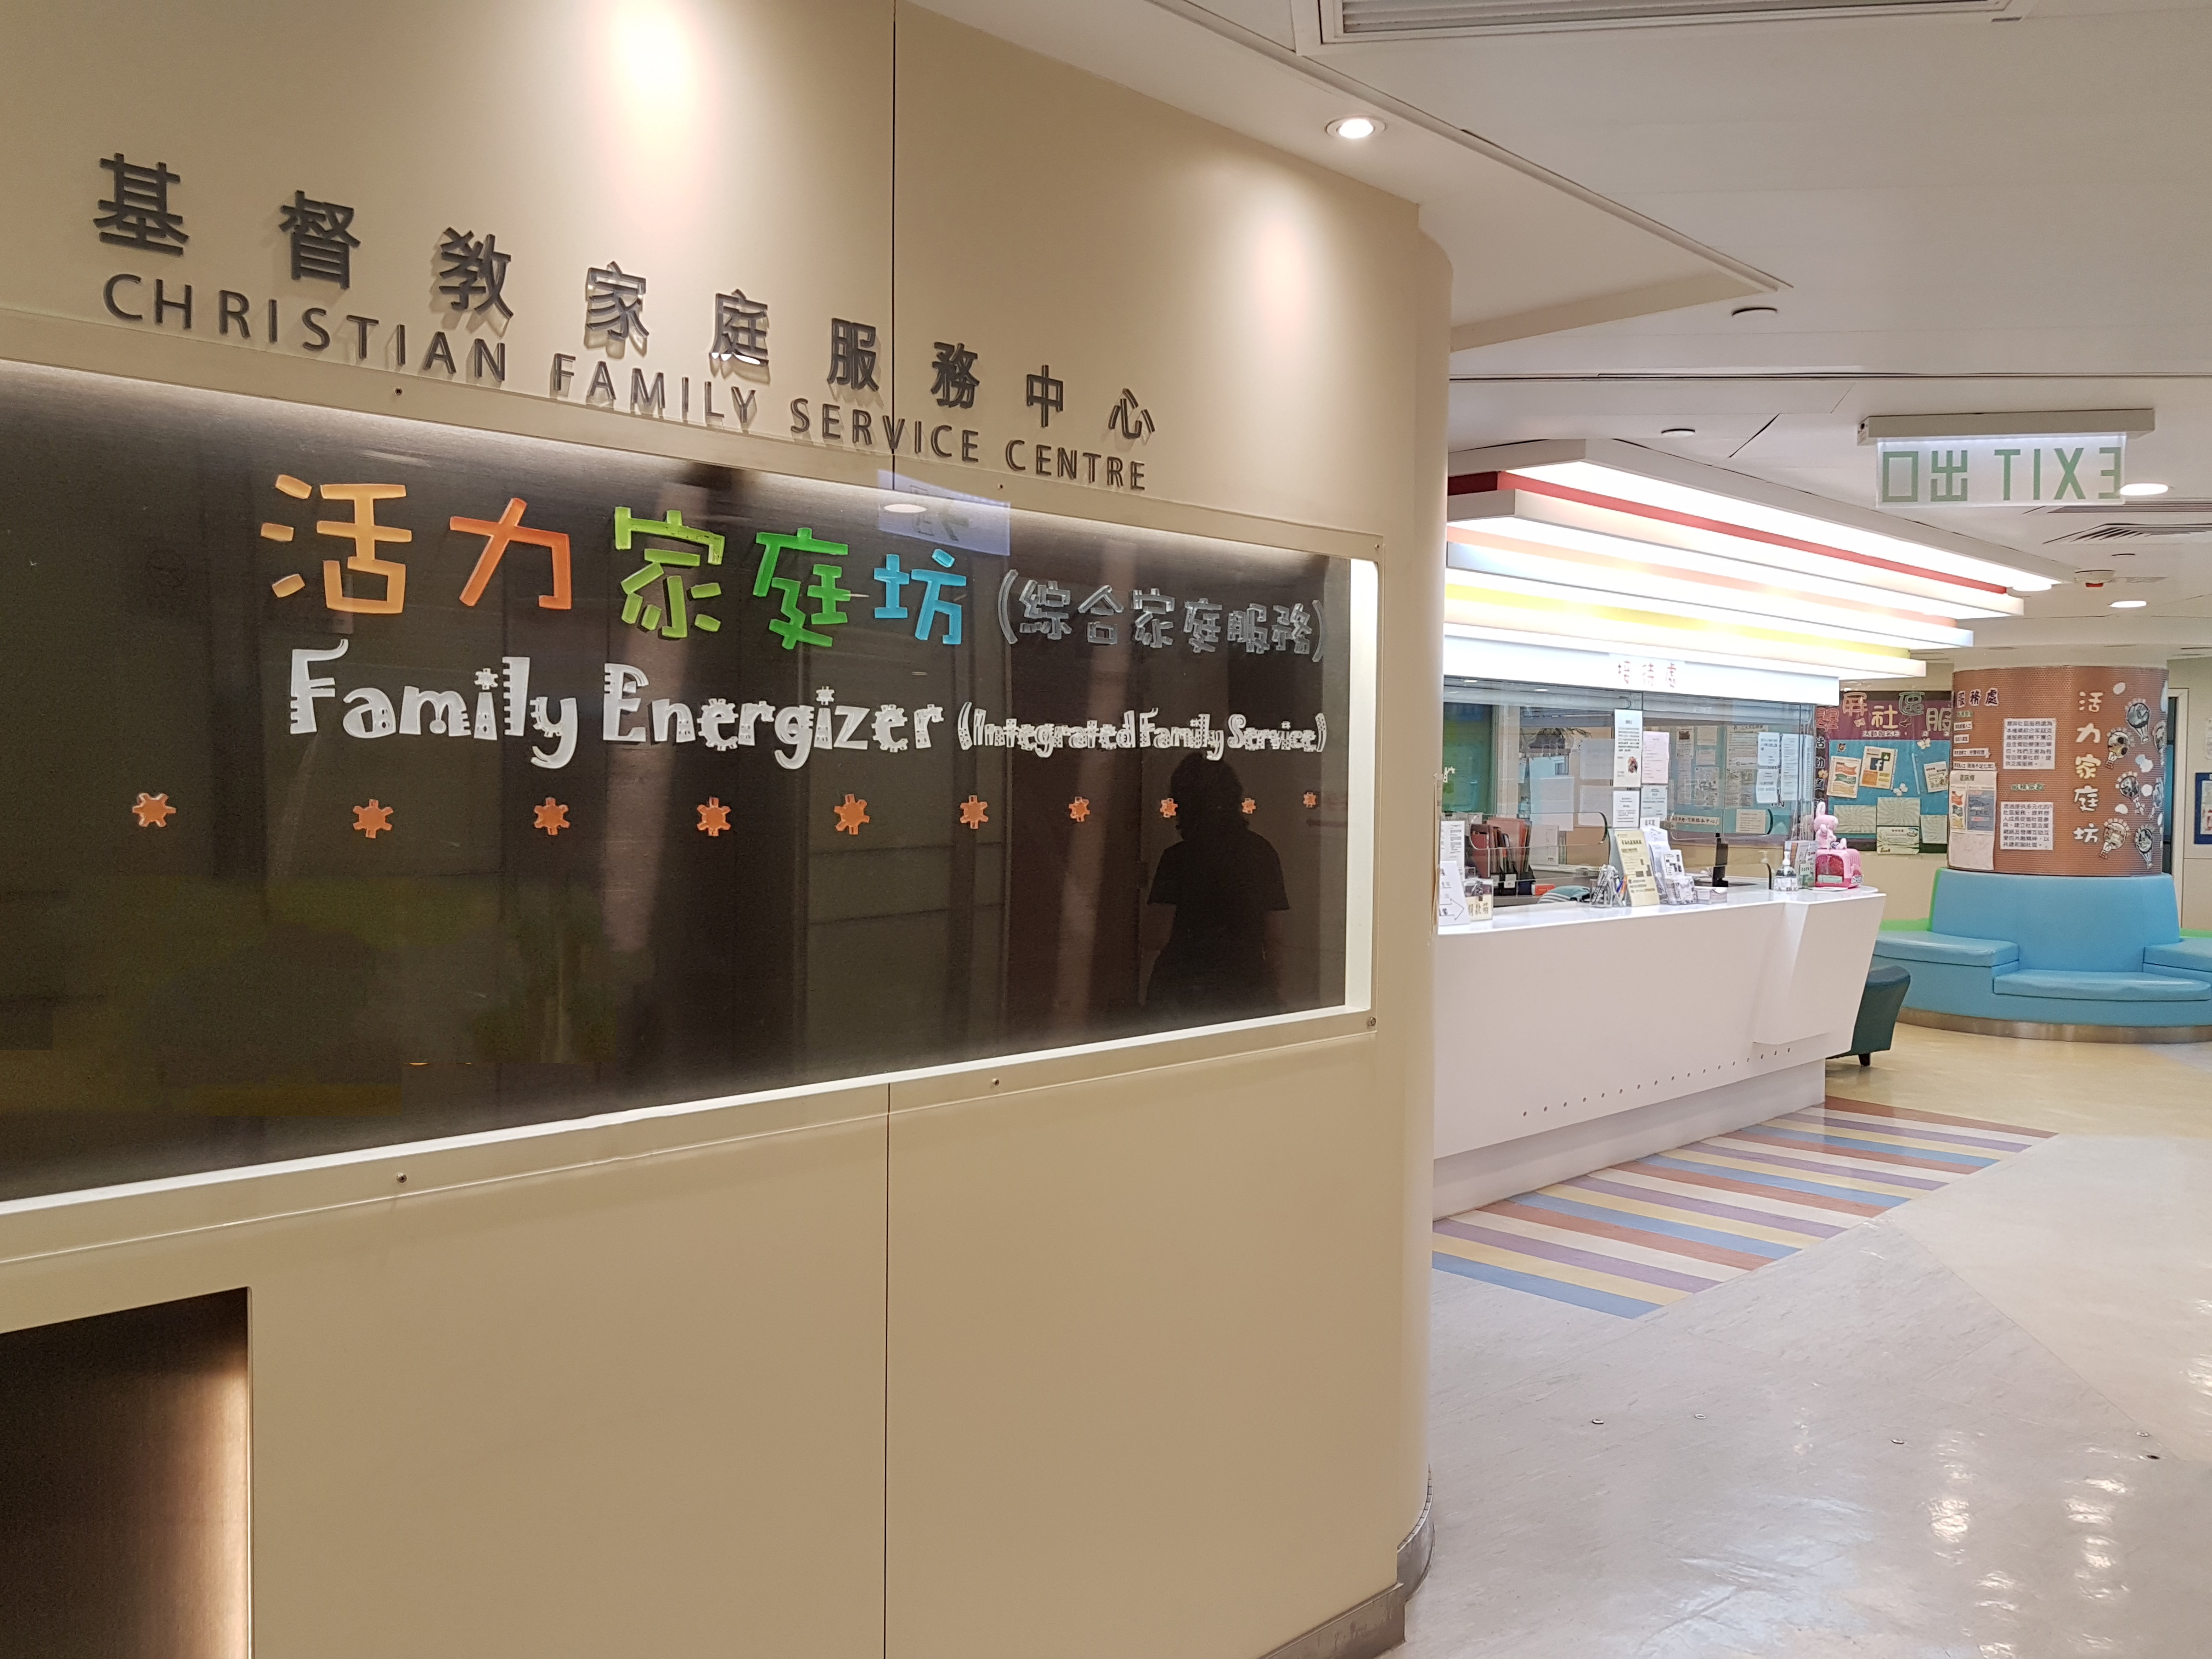  Family Energizer (Integrated Family Service) Entrance Photo 